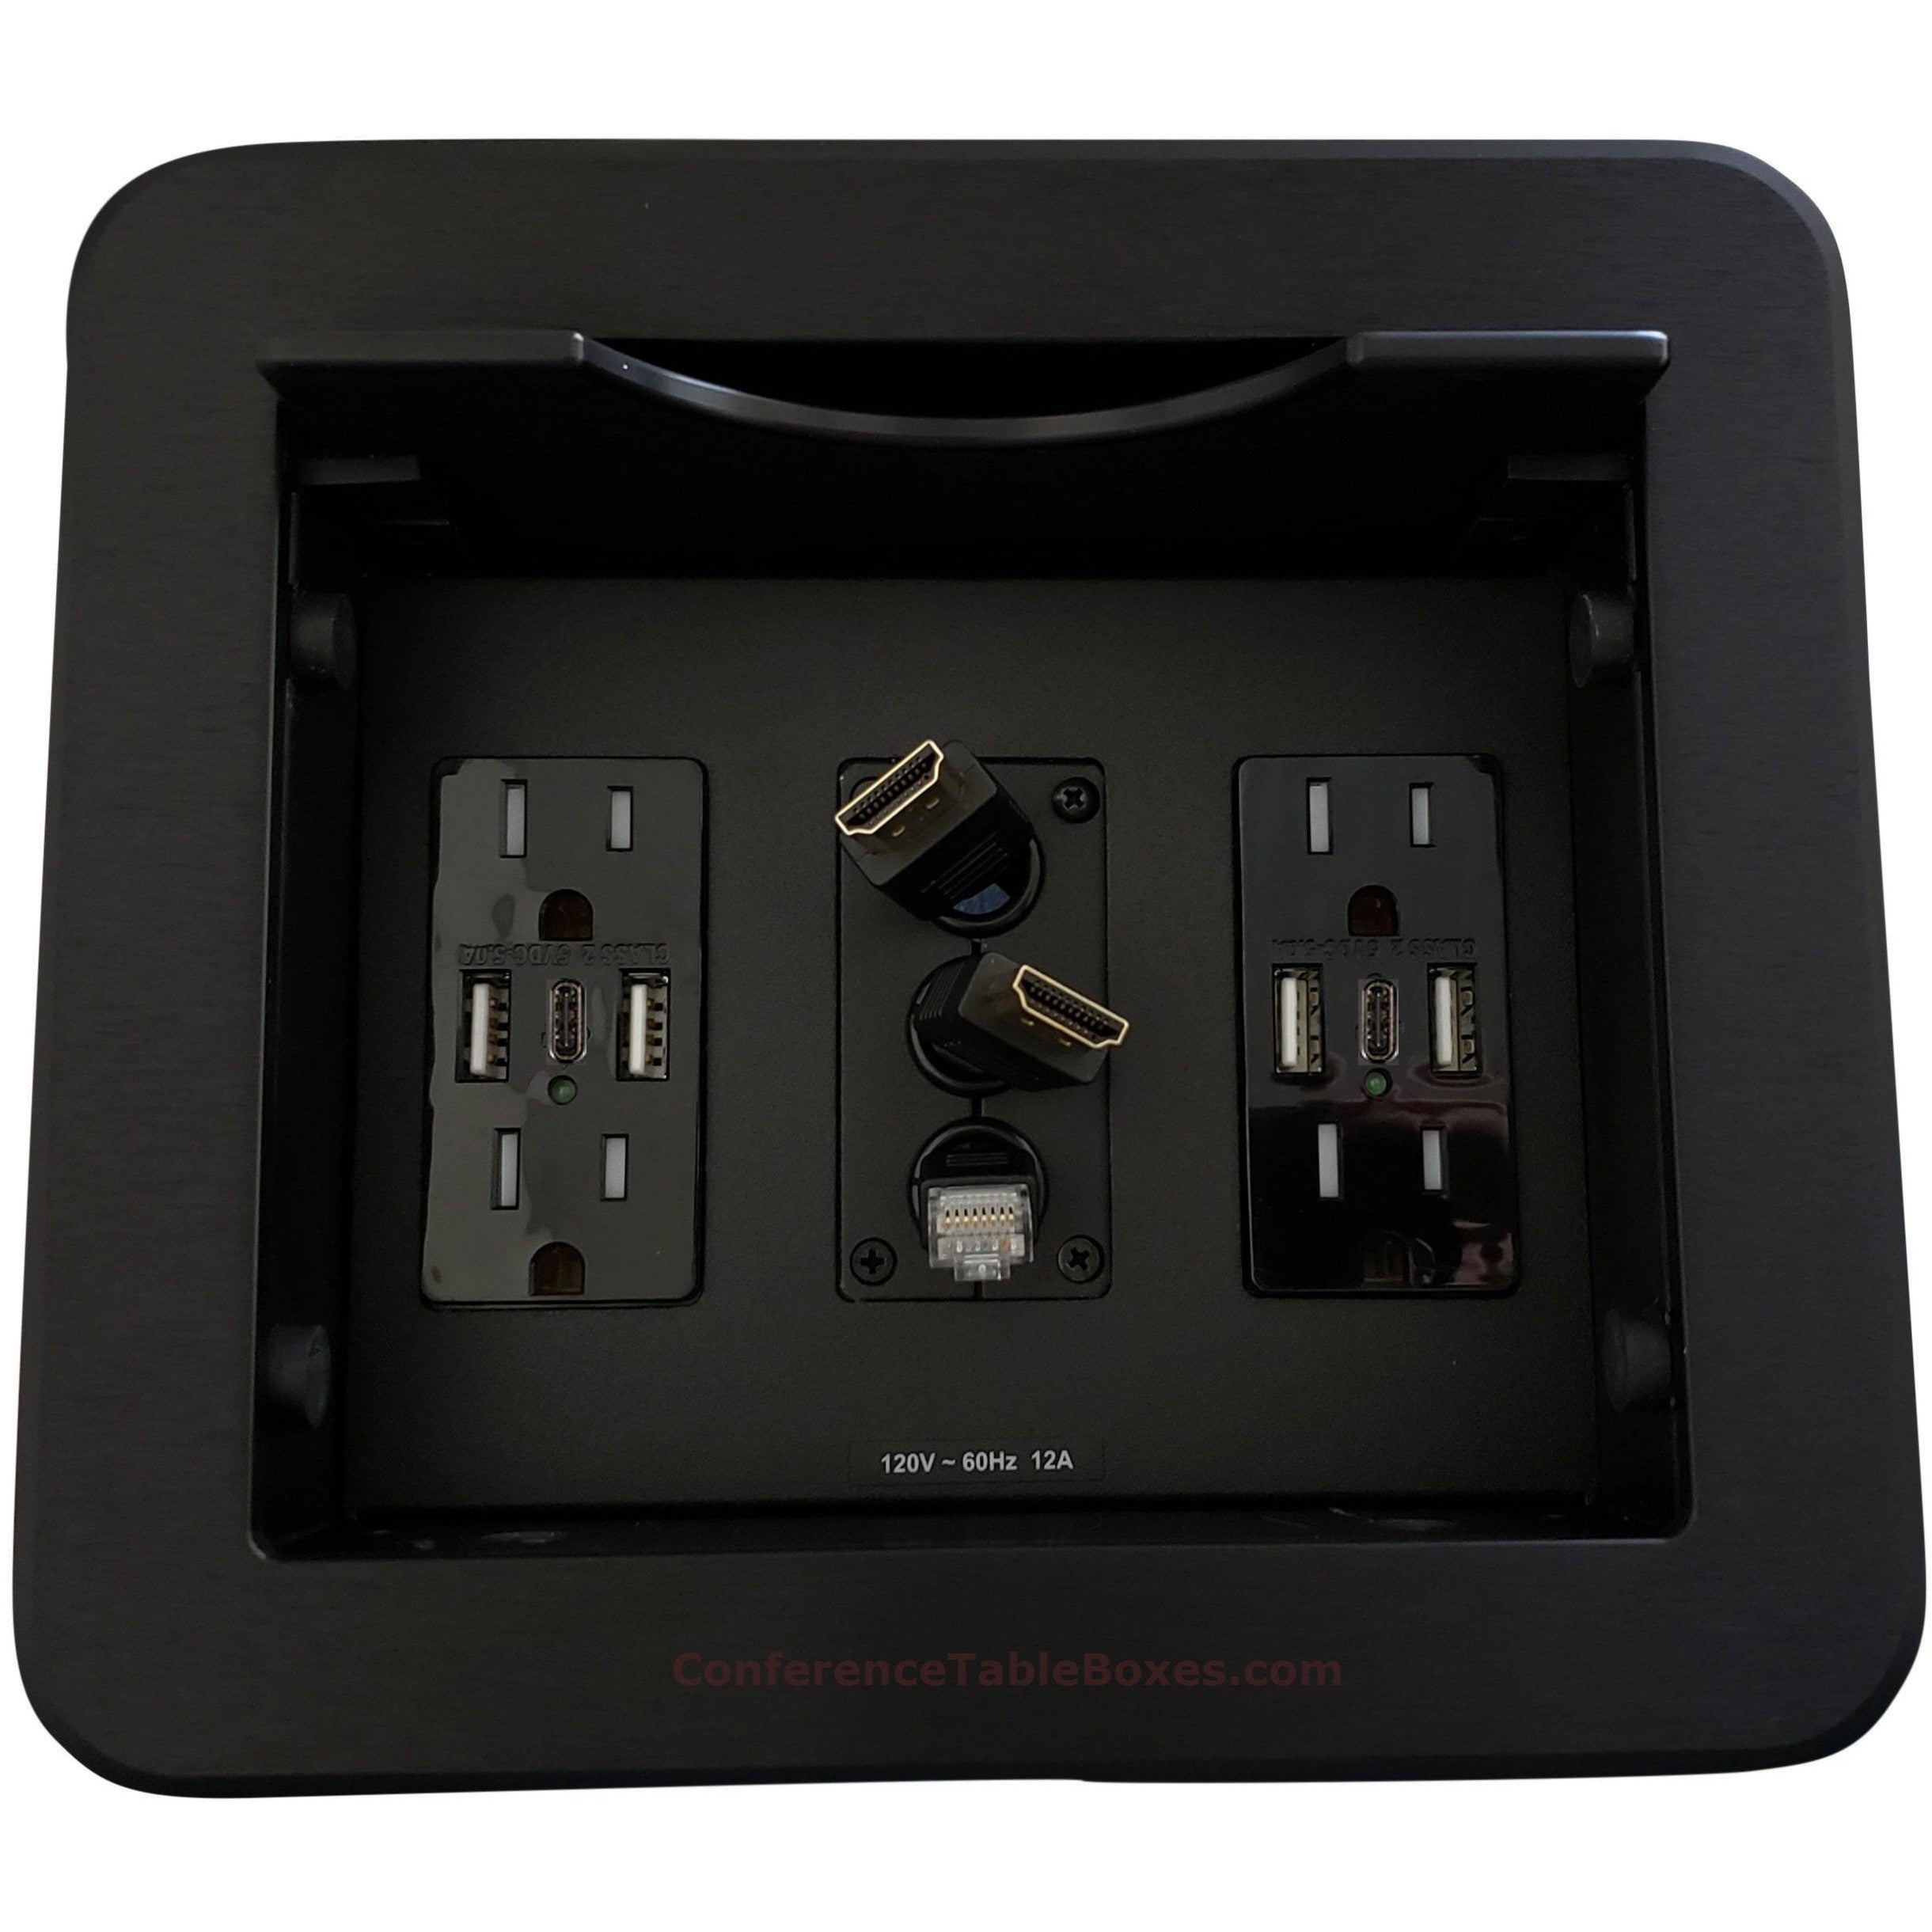 Cable Well 2 HDMI and 1 Cat6 Retracting Cables, 4 Power, 6 USB, Black –  Conference Table Boxes